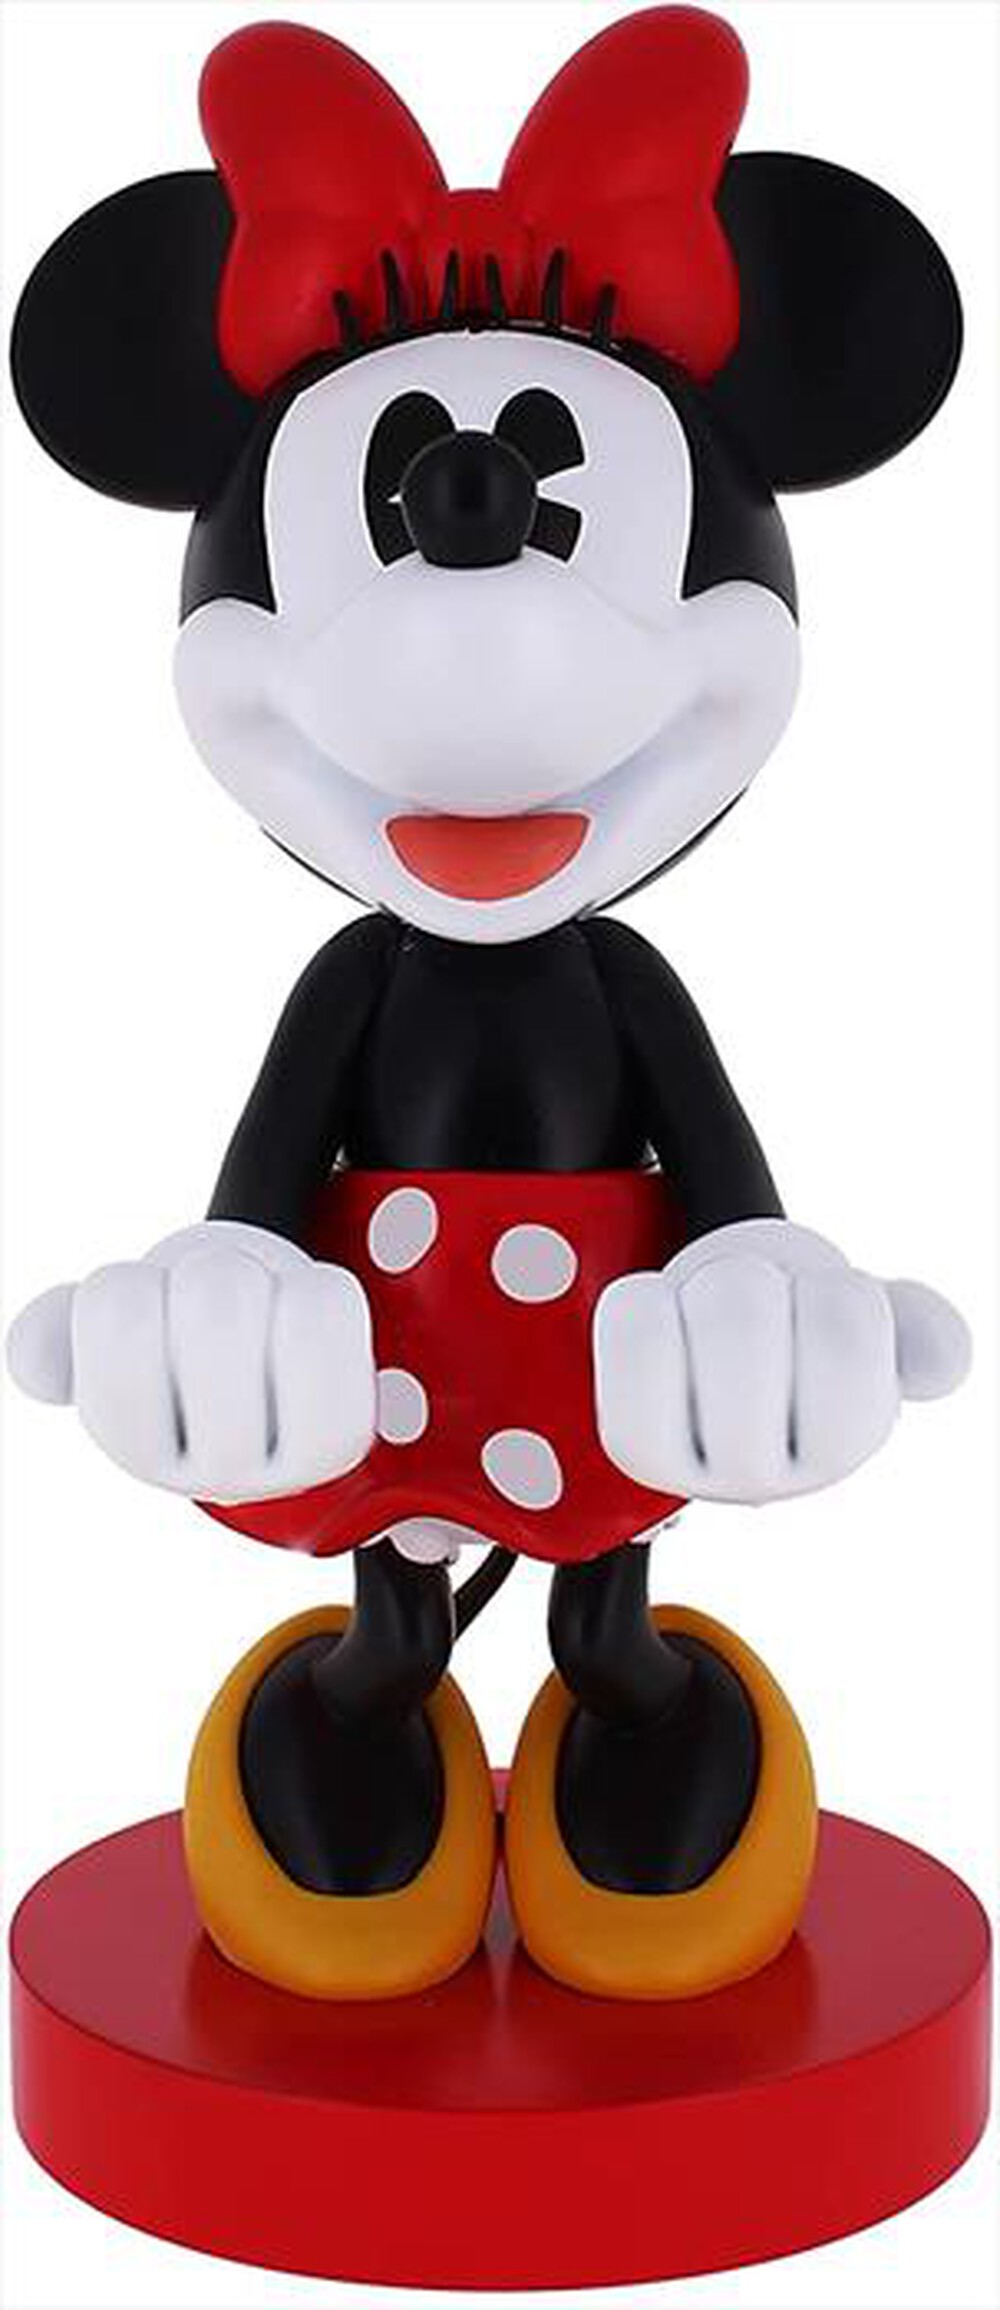 "EXQUISITE GAMING - MINNIE MOUSE CABLE GUY"